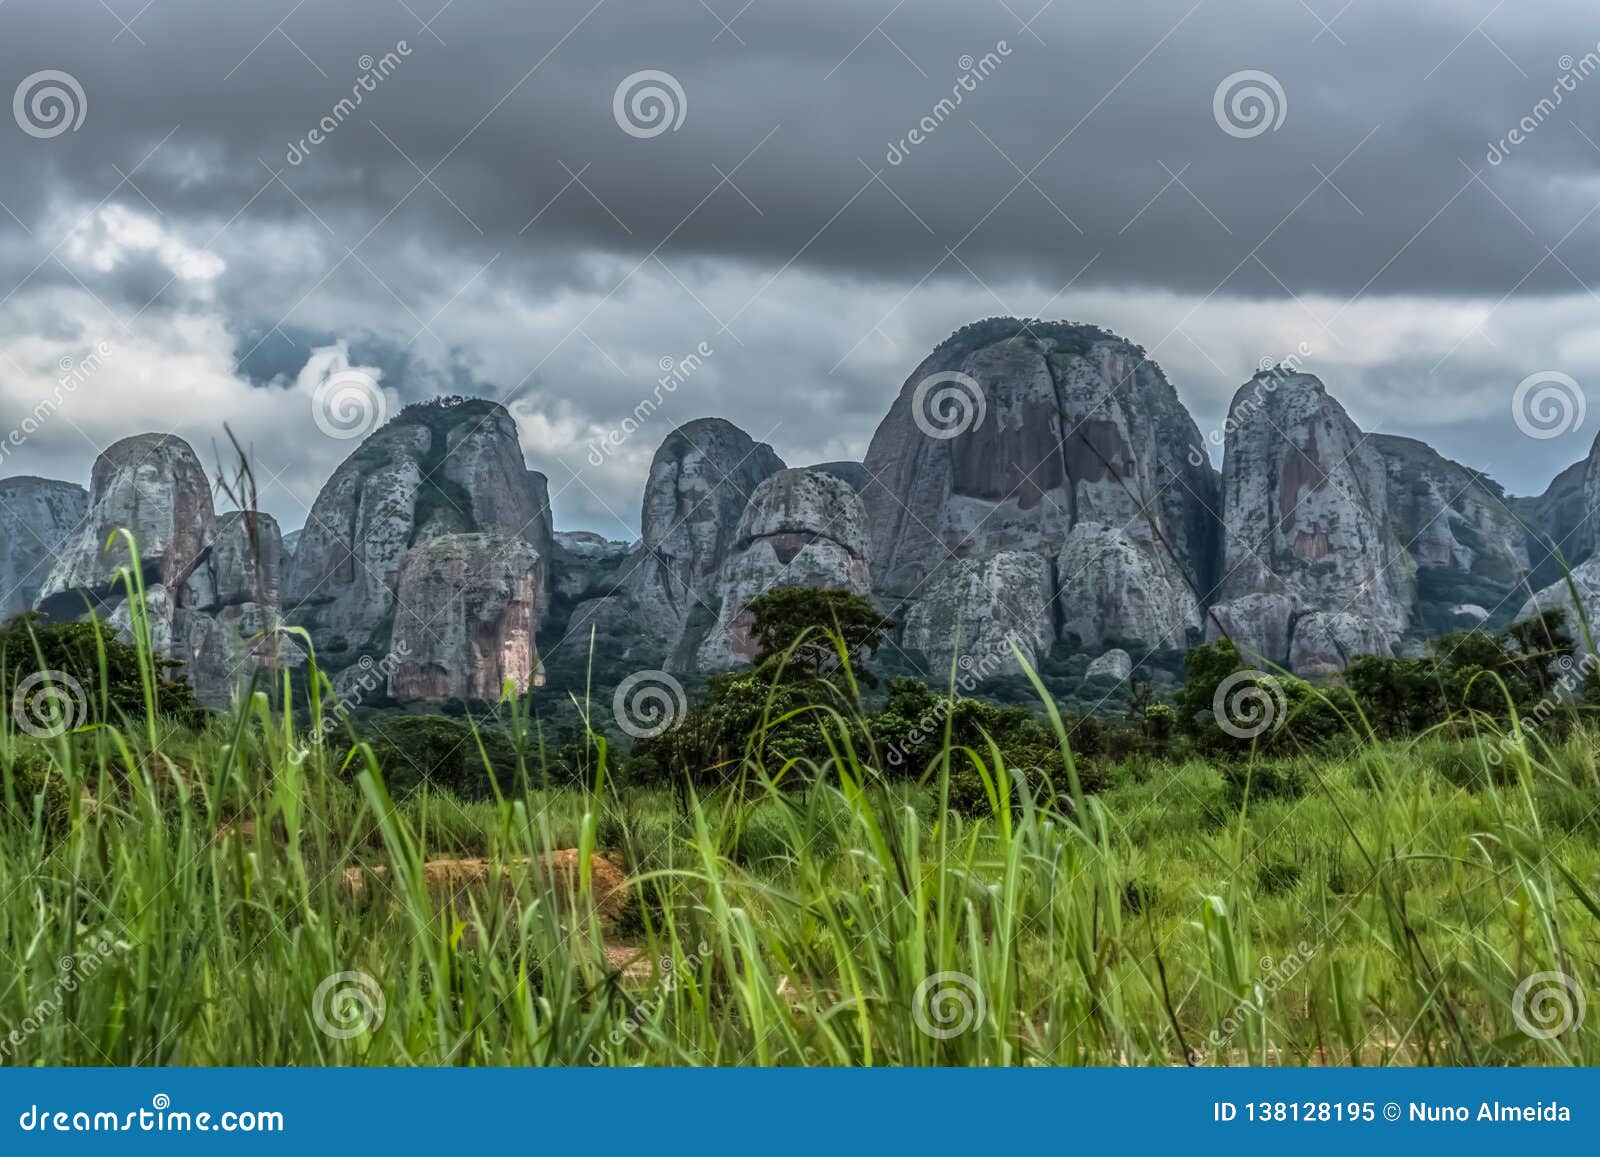 view at the mountains pungo andongo, pedras negras , black stones, huge geologic rock s